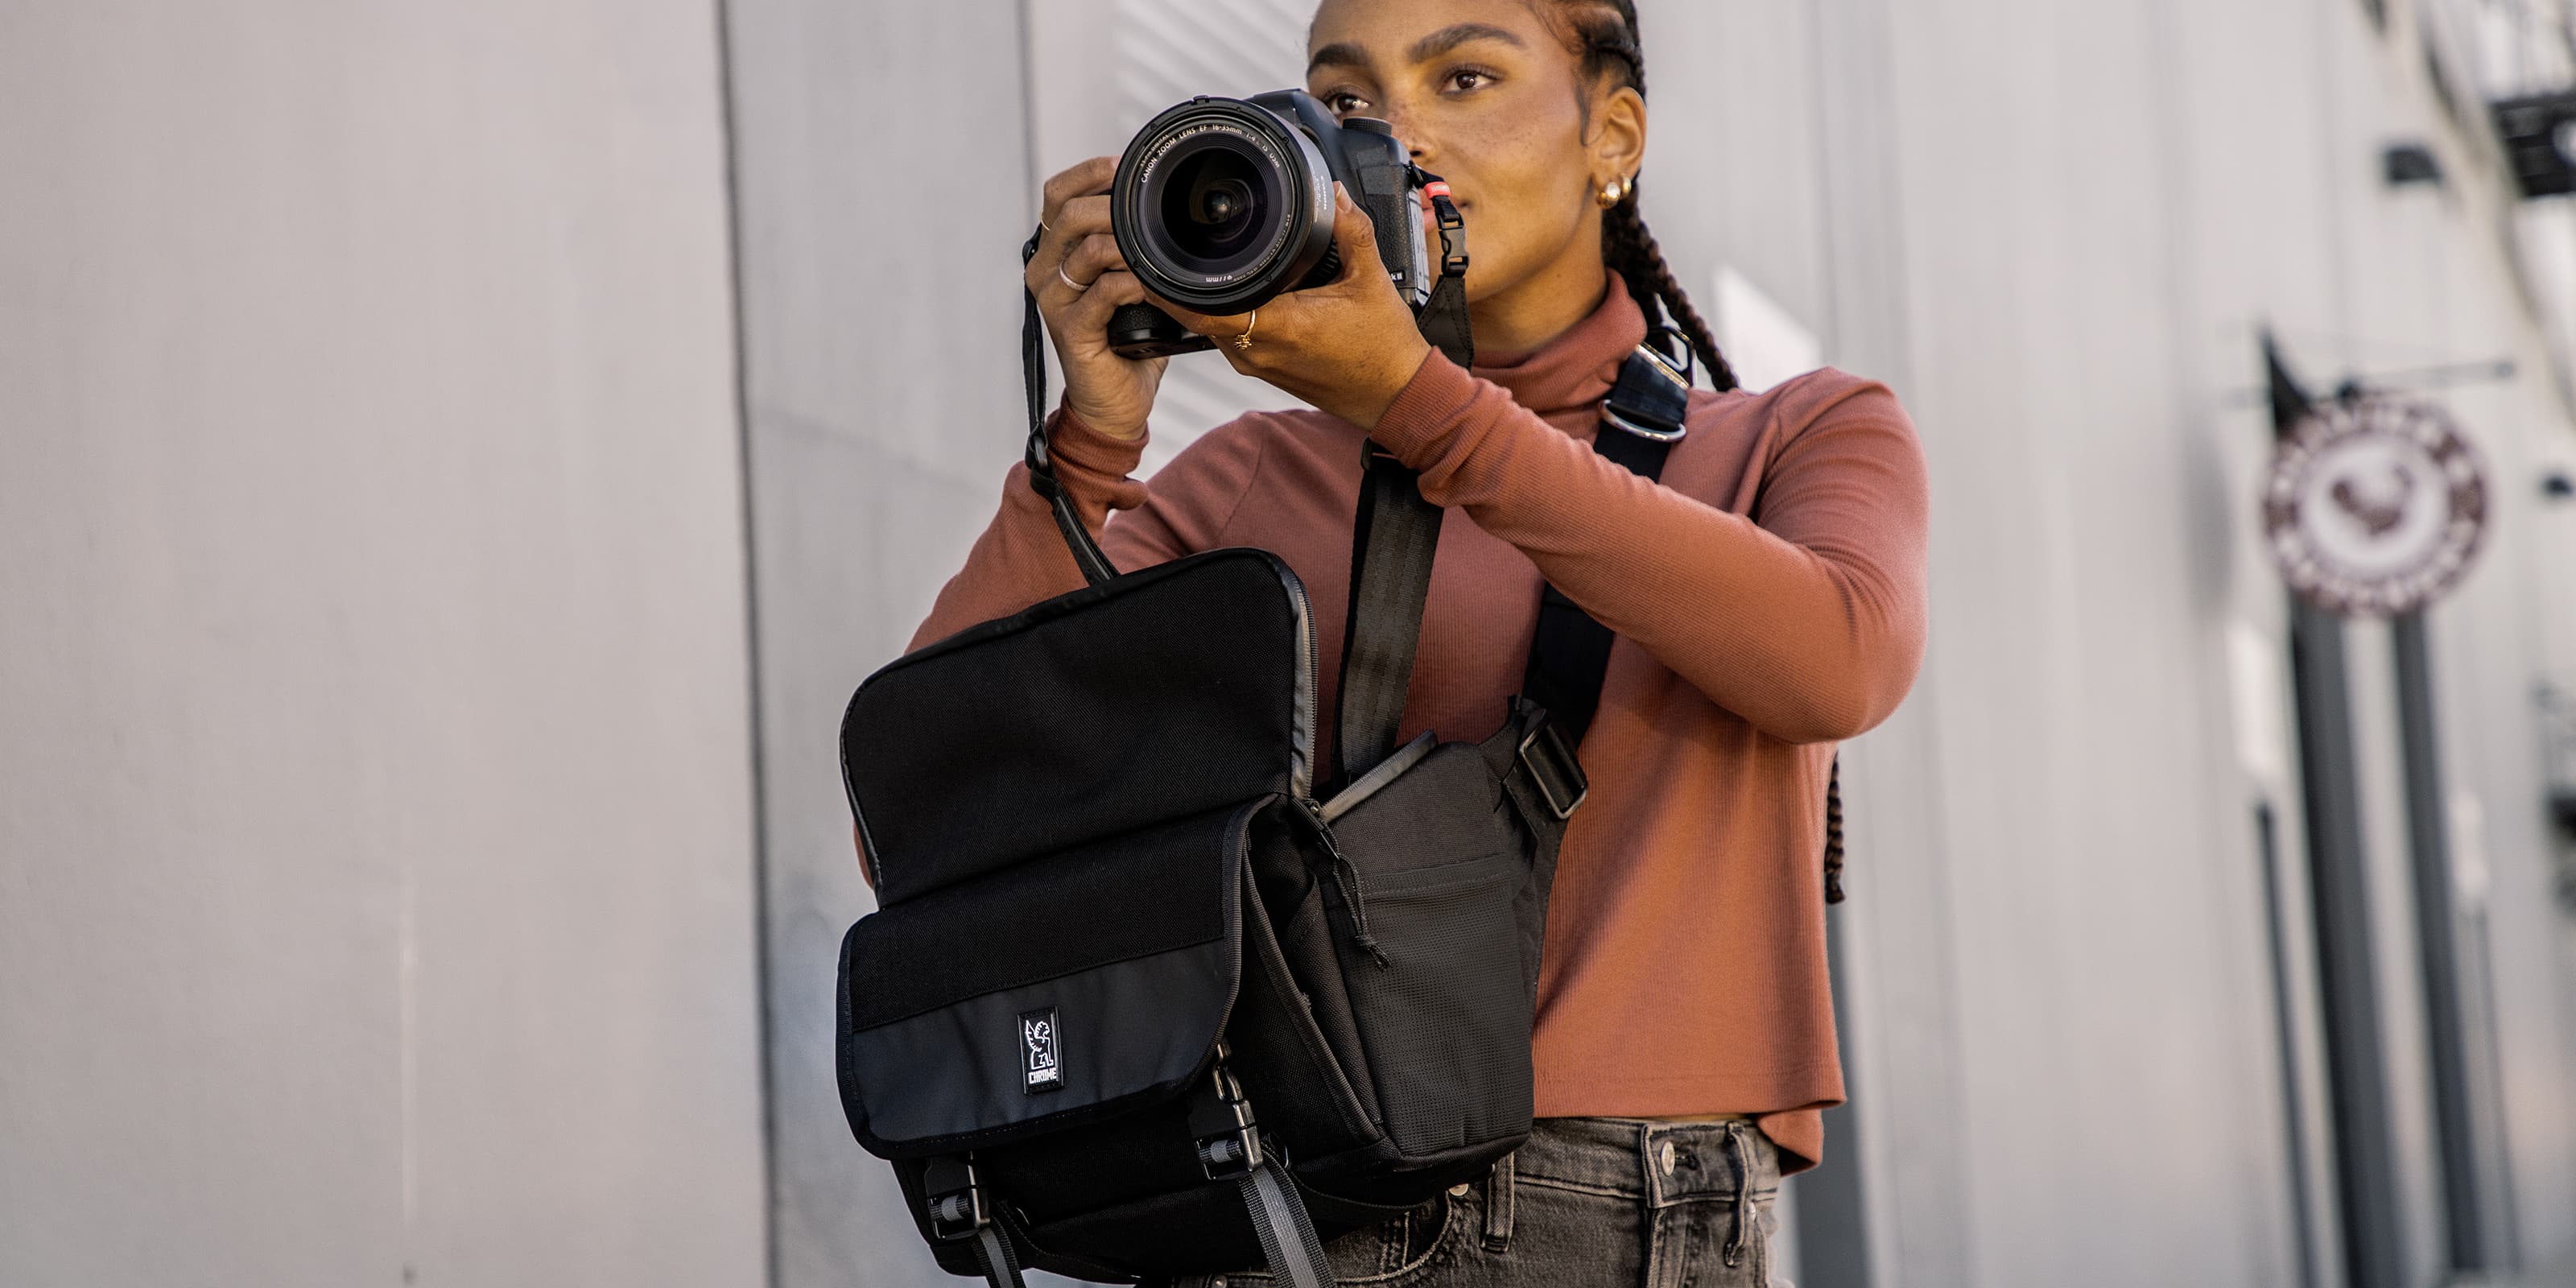 Niko Camera Sling worn by a photographer taking a photo desktop size image